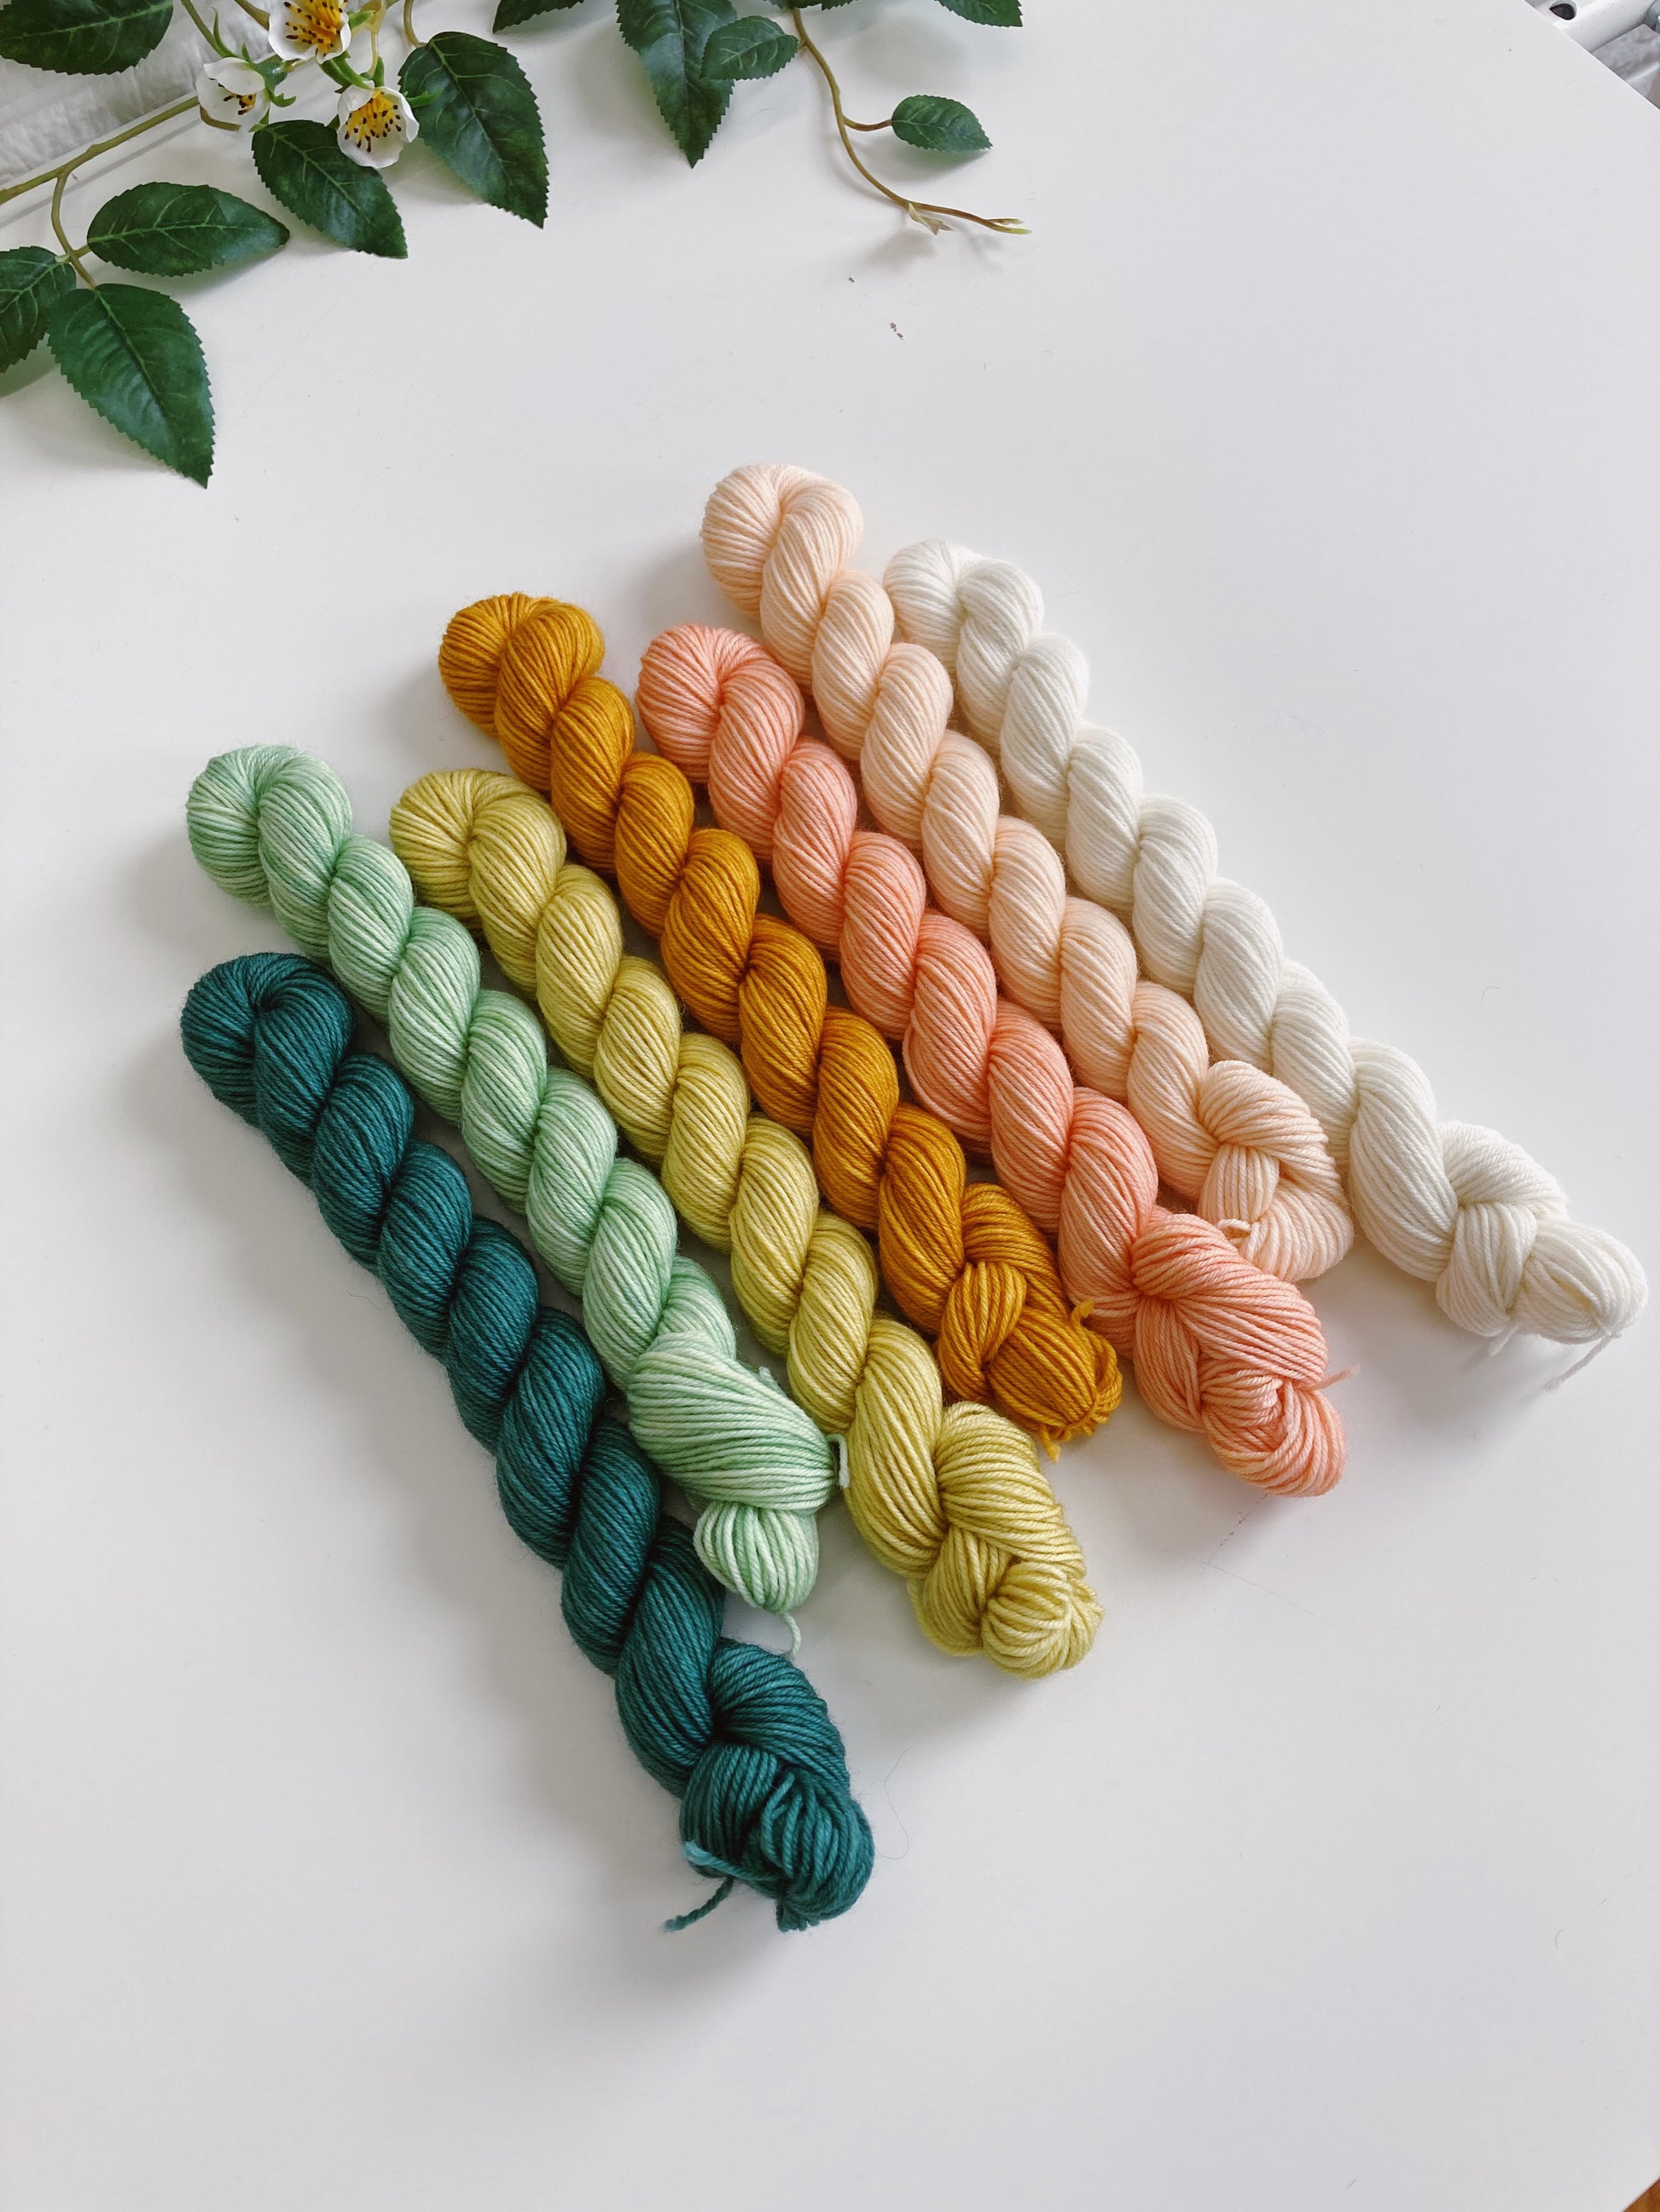 Set of 5 Skeins Alize Wooltime Solid Colors and Self-striping